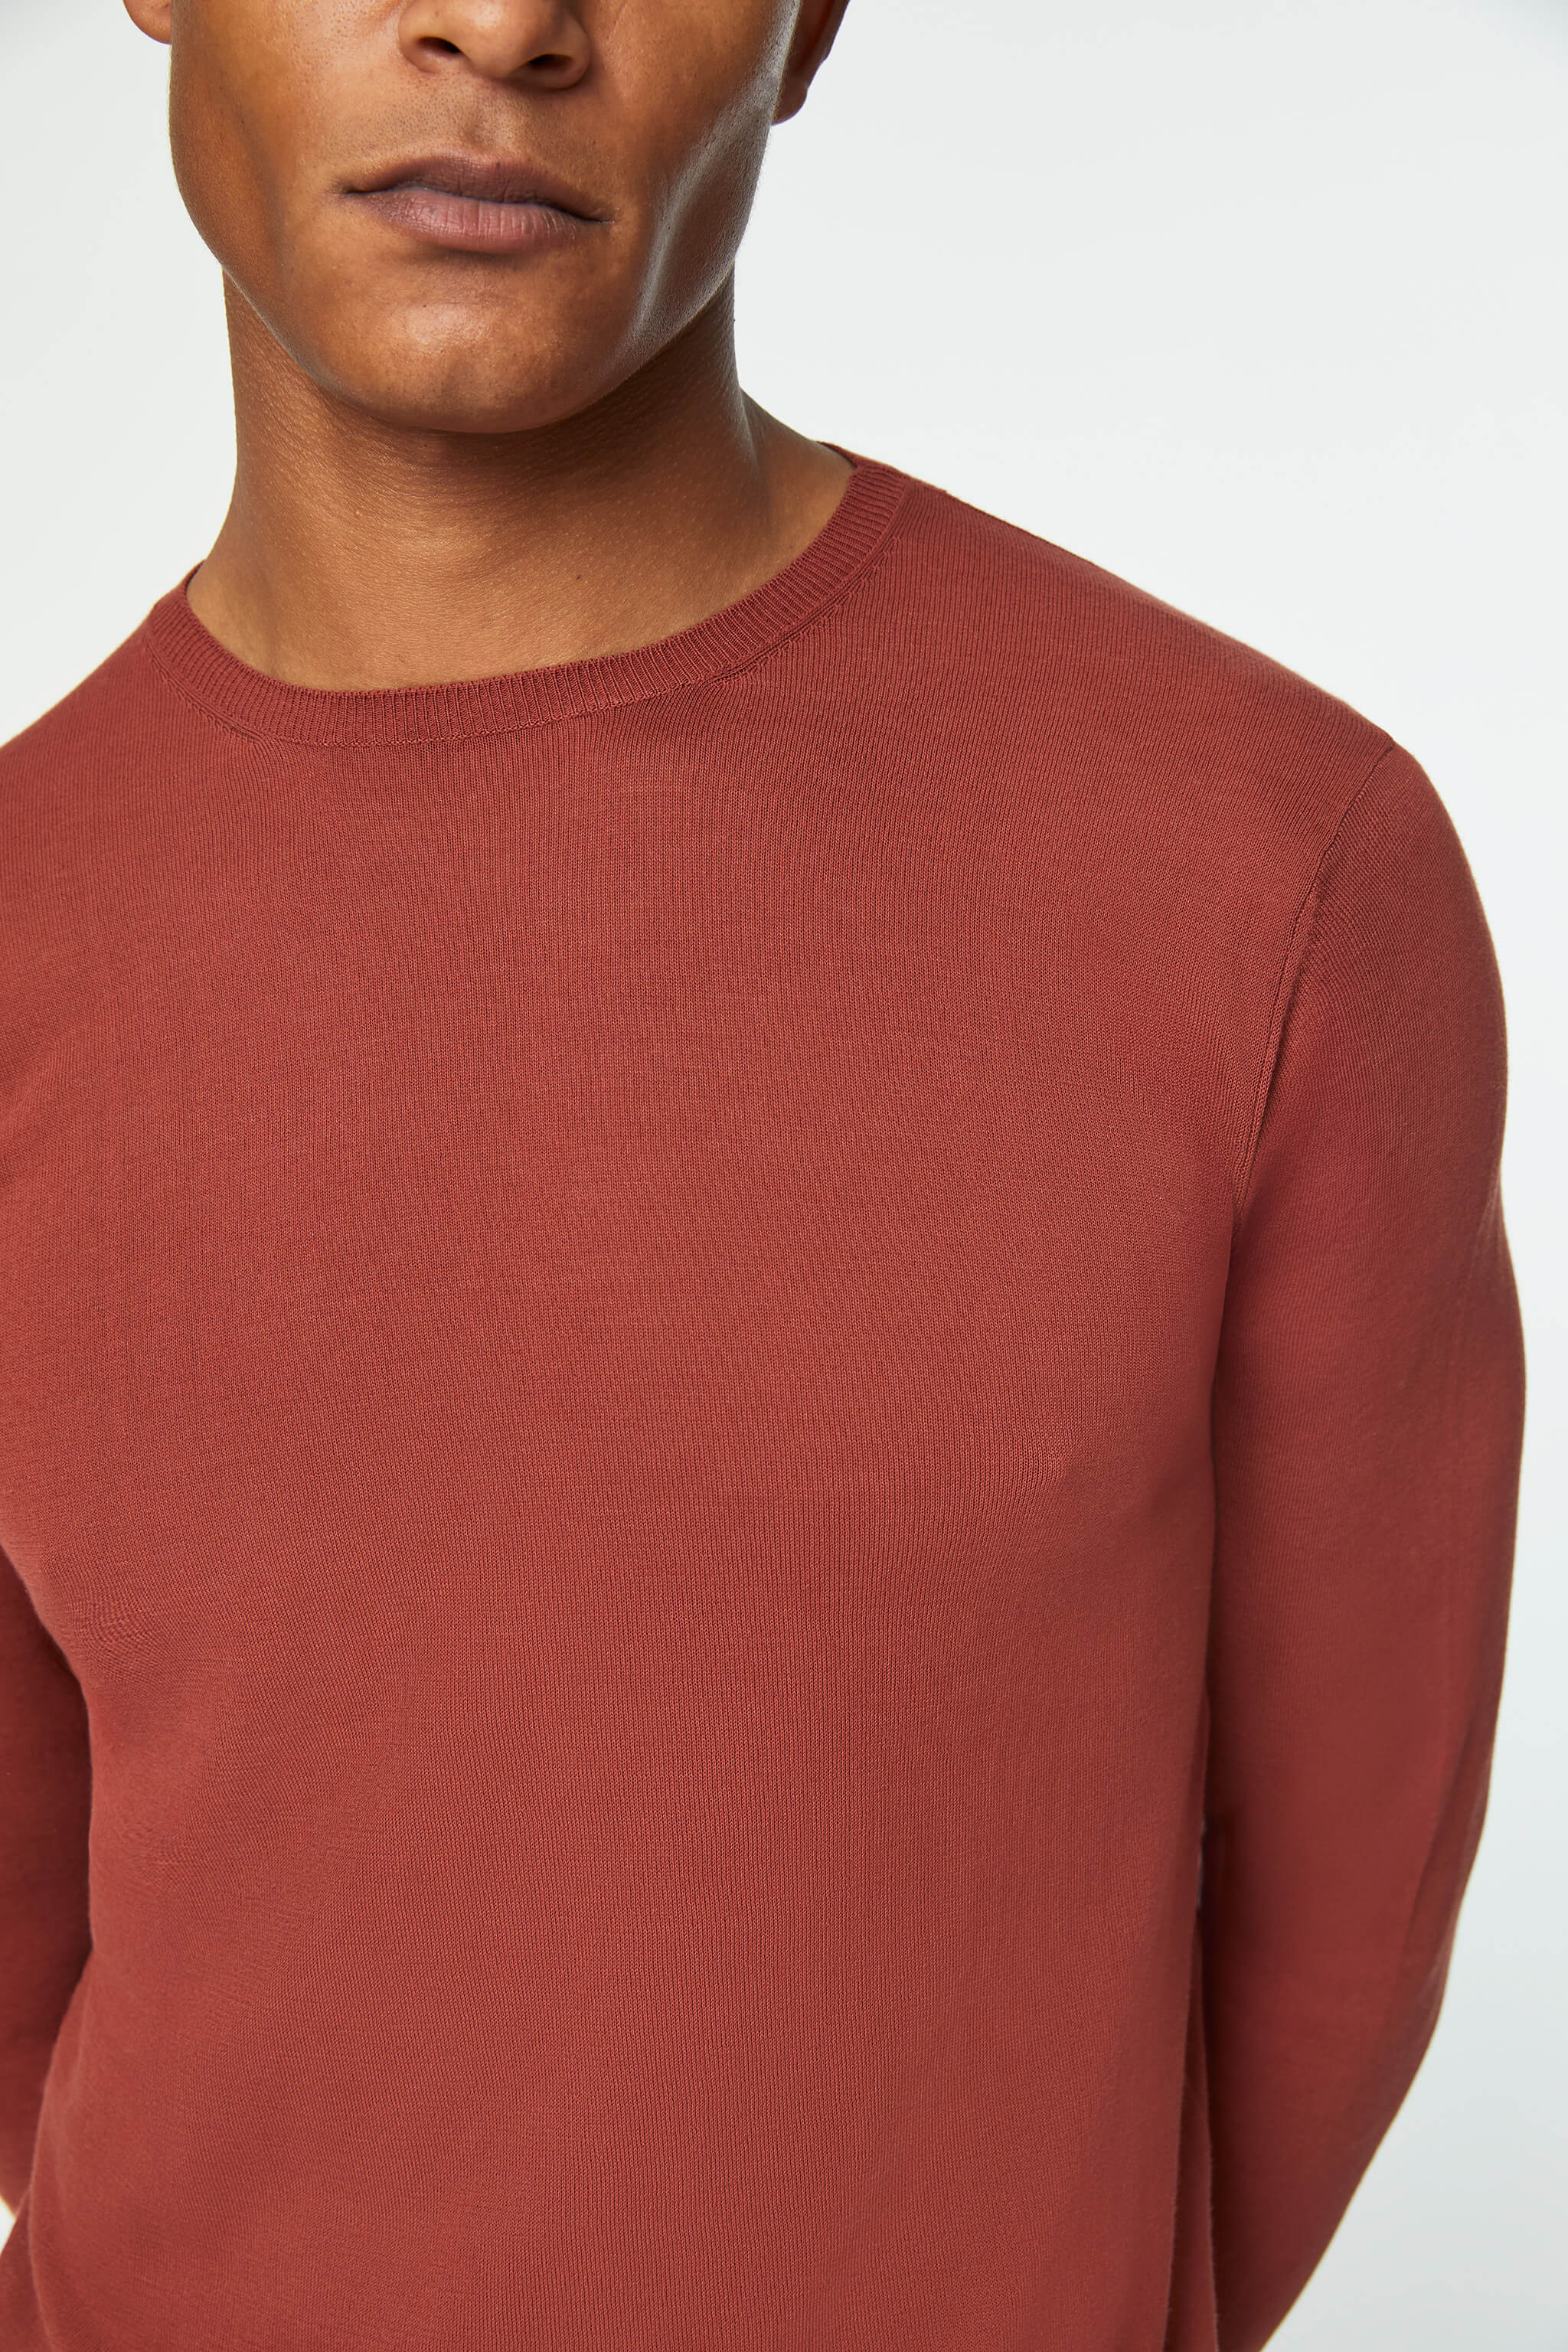 Long-sleeved cotton knit in Red brick